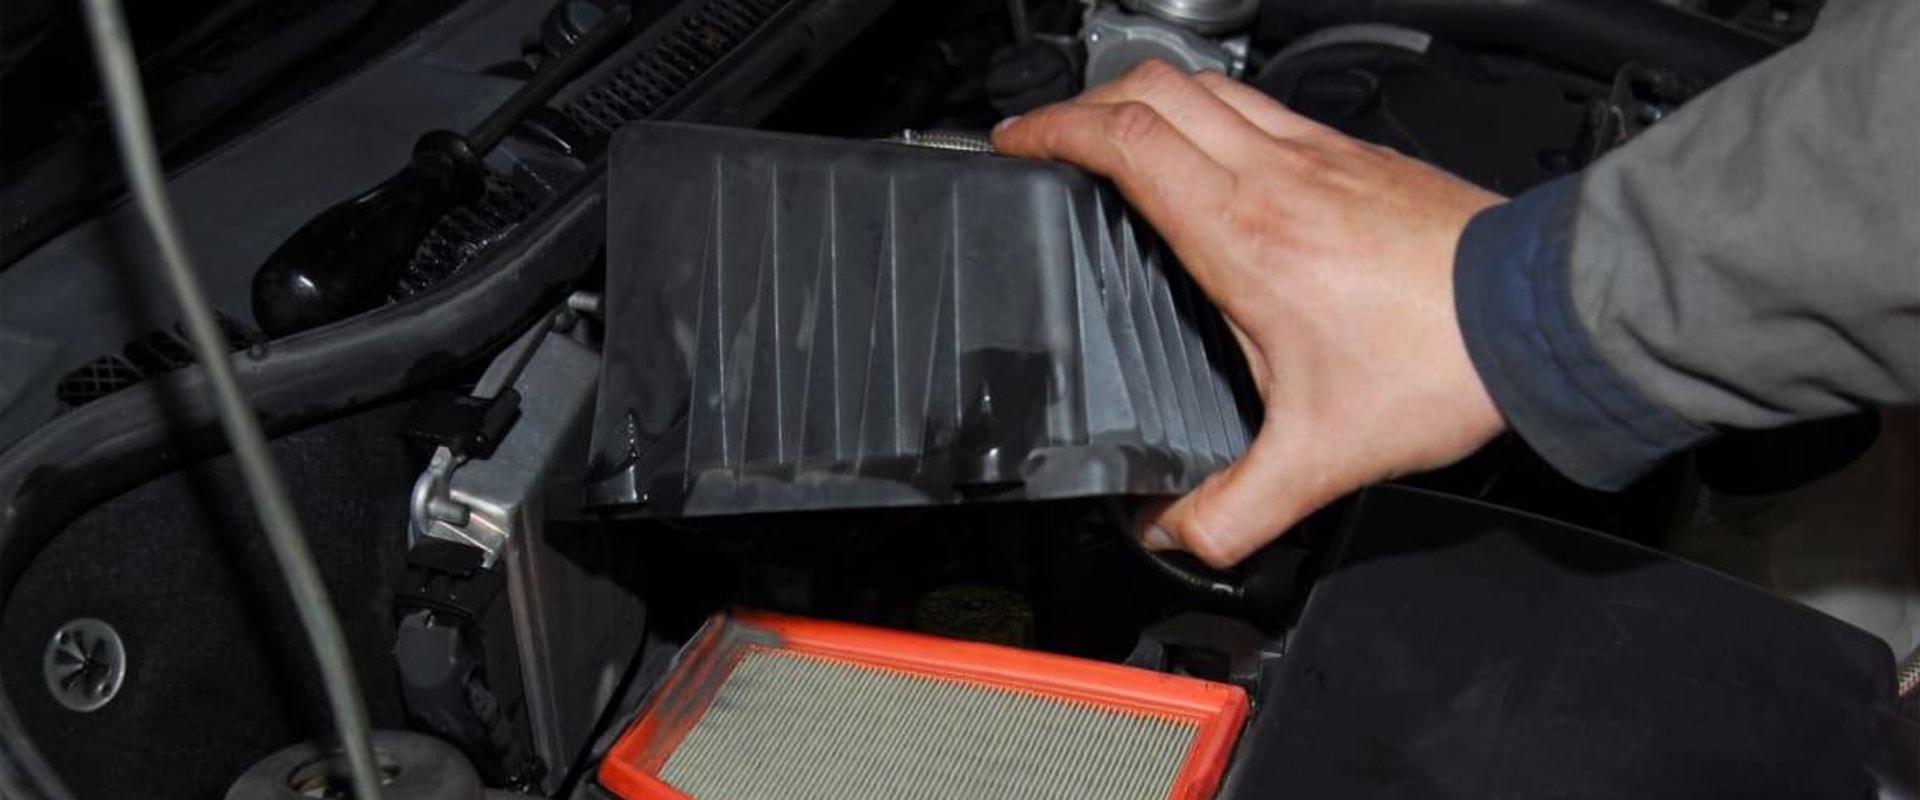 Do High-Performance Car Air Filters Really Make a Difference?